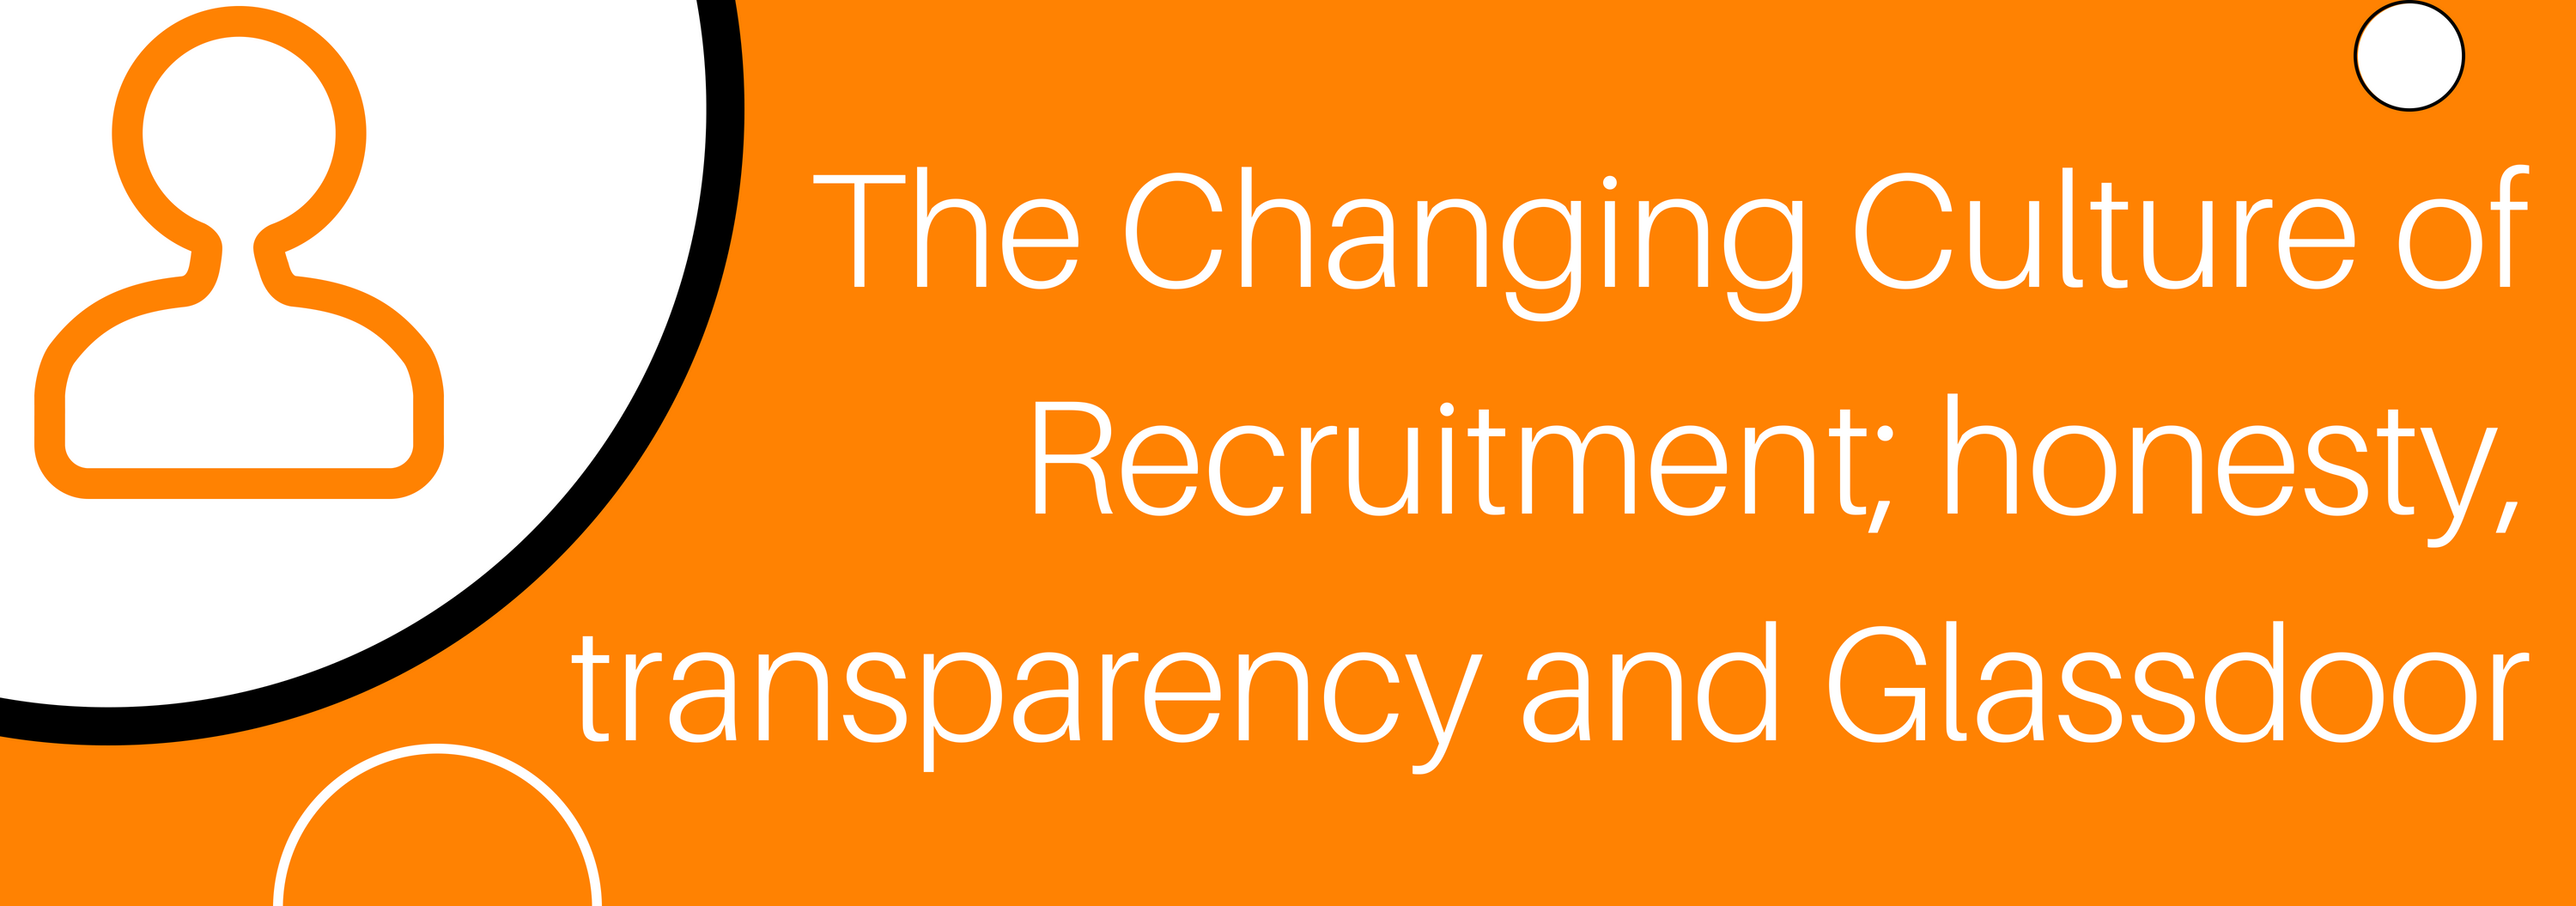 The Changing Culture of Recruitment; transparency and Glassdoor